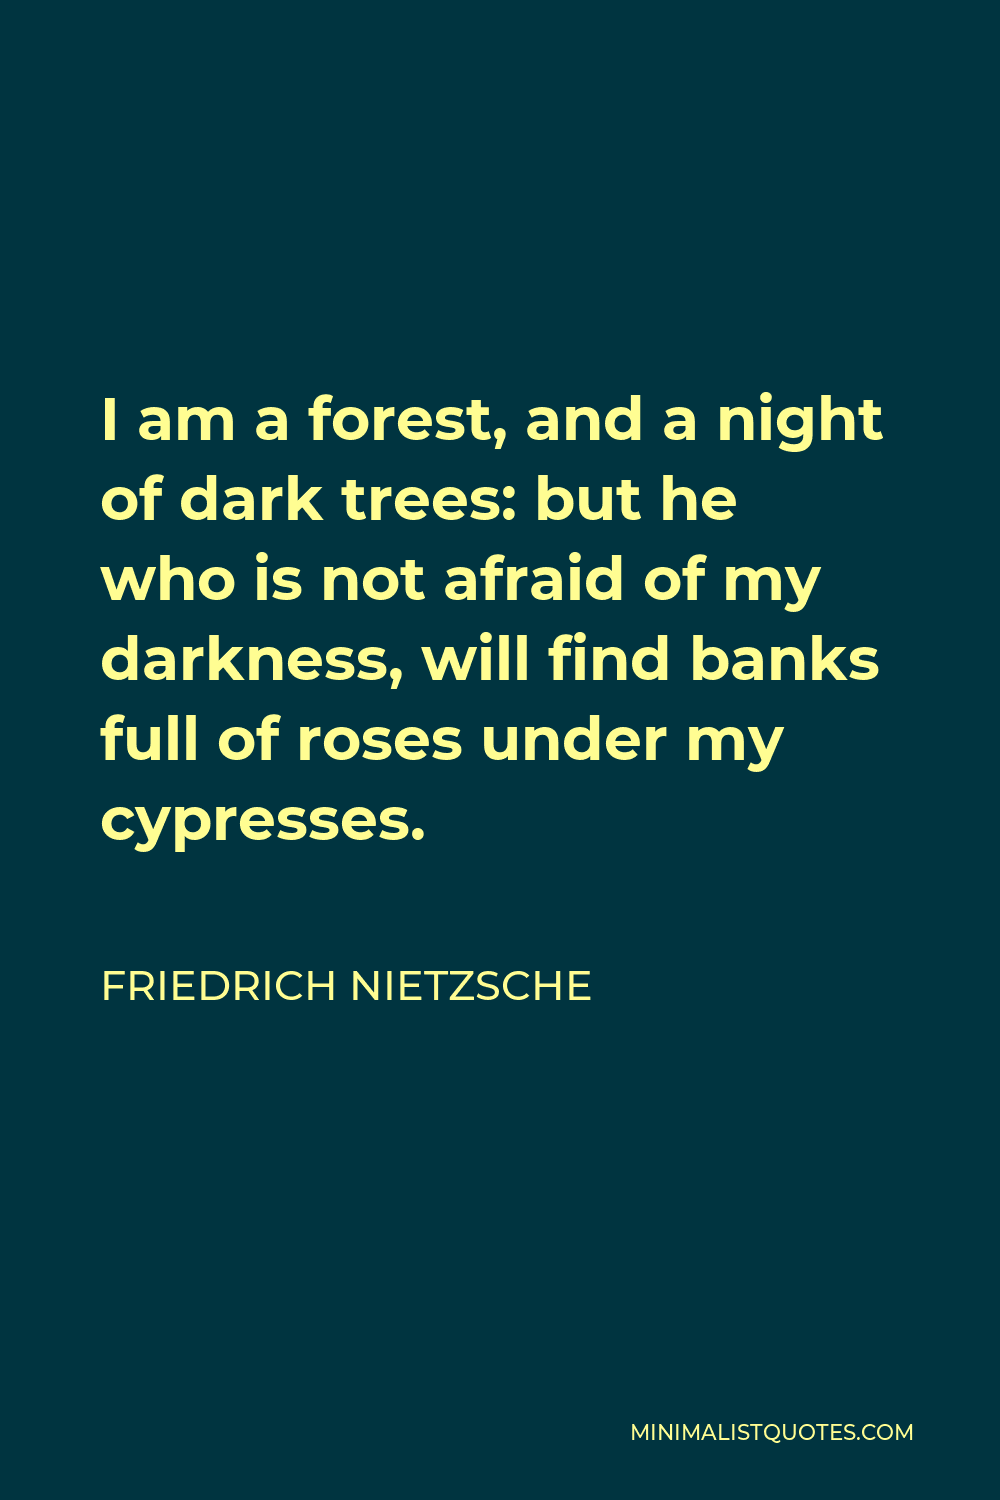 Friedrich Nietzsche Quote - I am a forest, and a night of dark trees: but he who is not afraid of my darkness, will find banks full of roses under my cypresses.